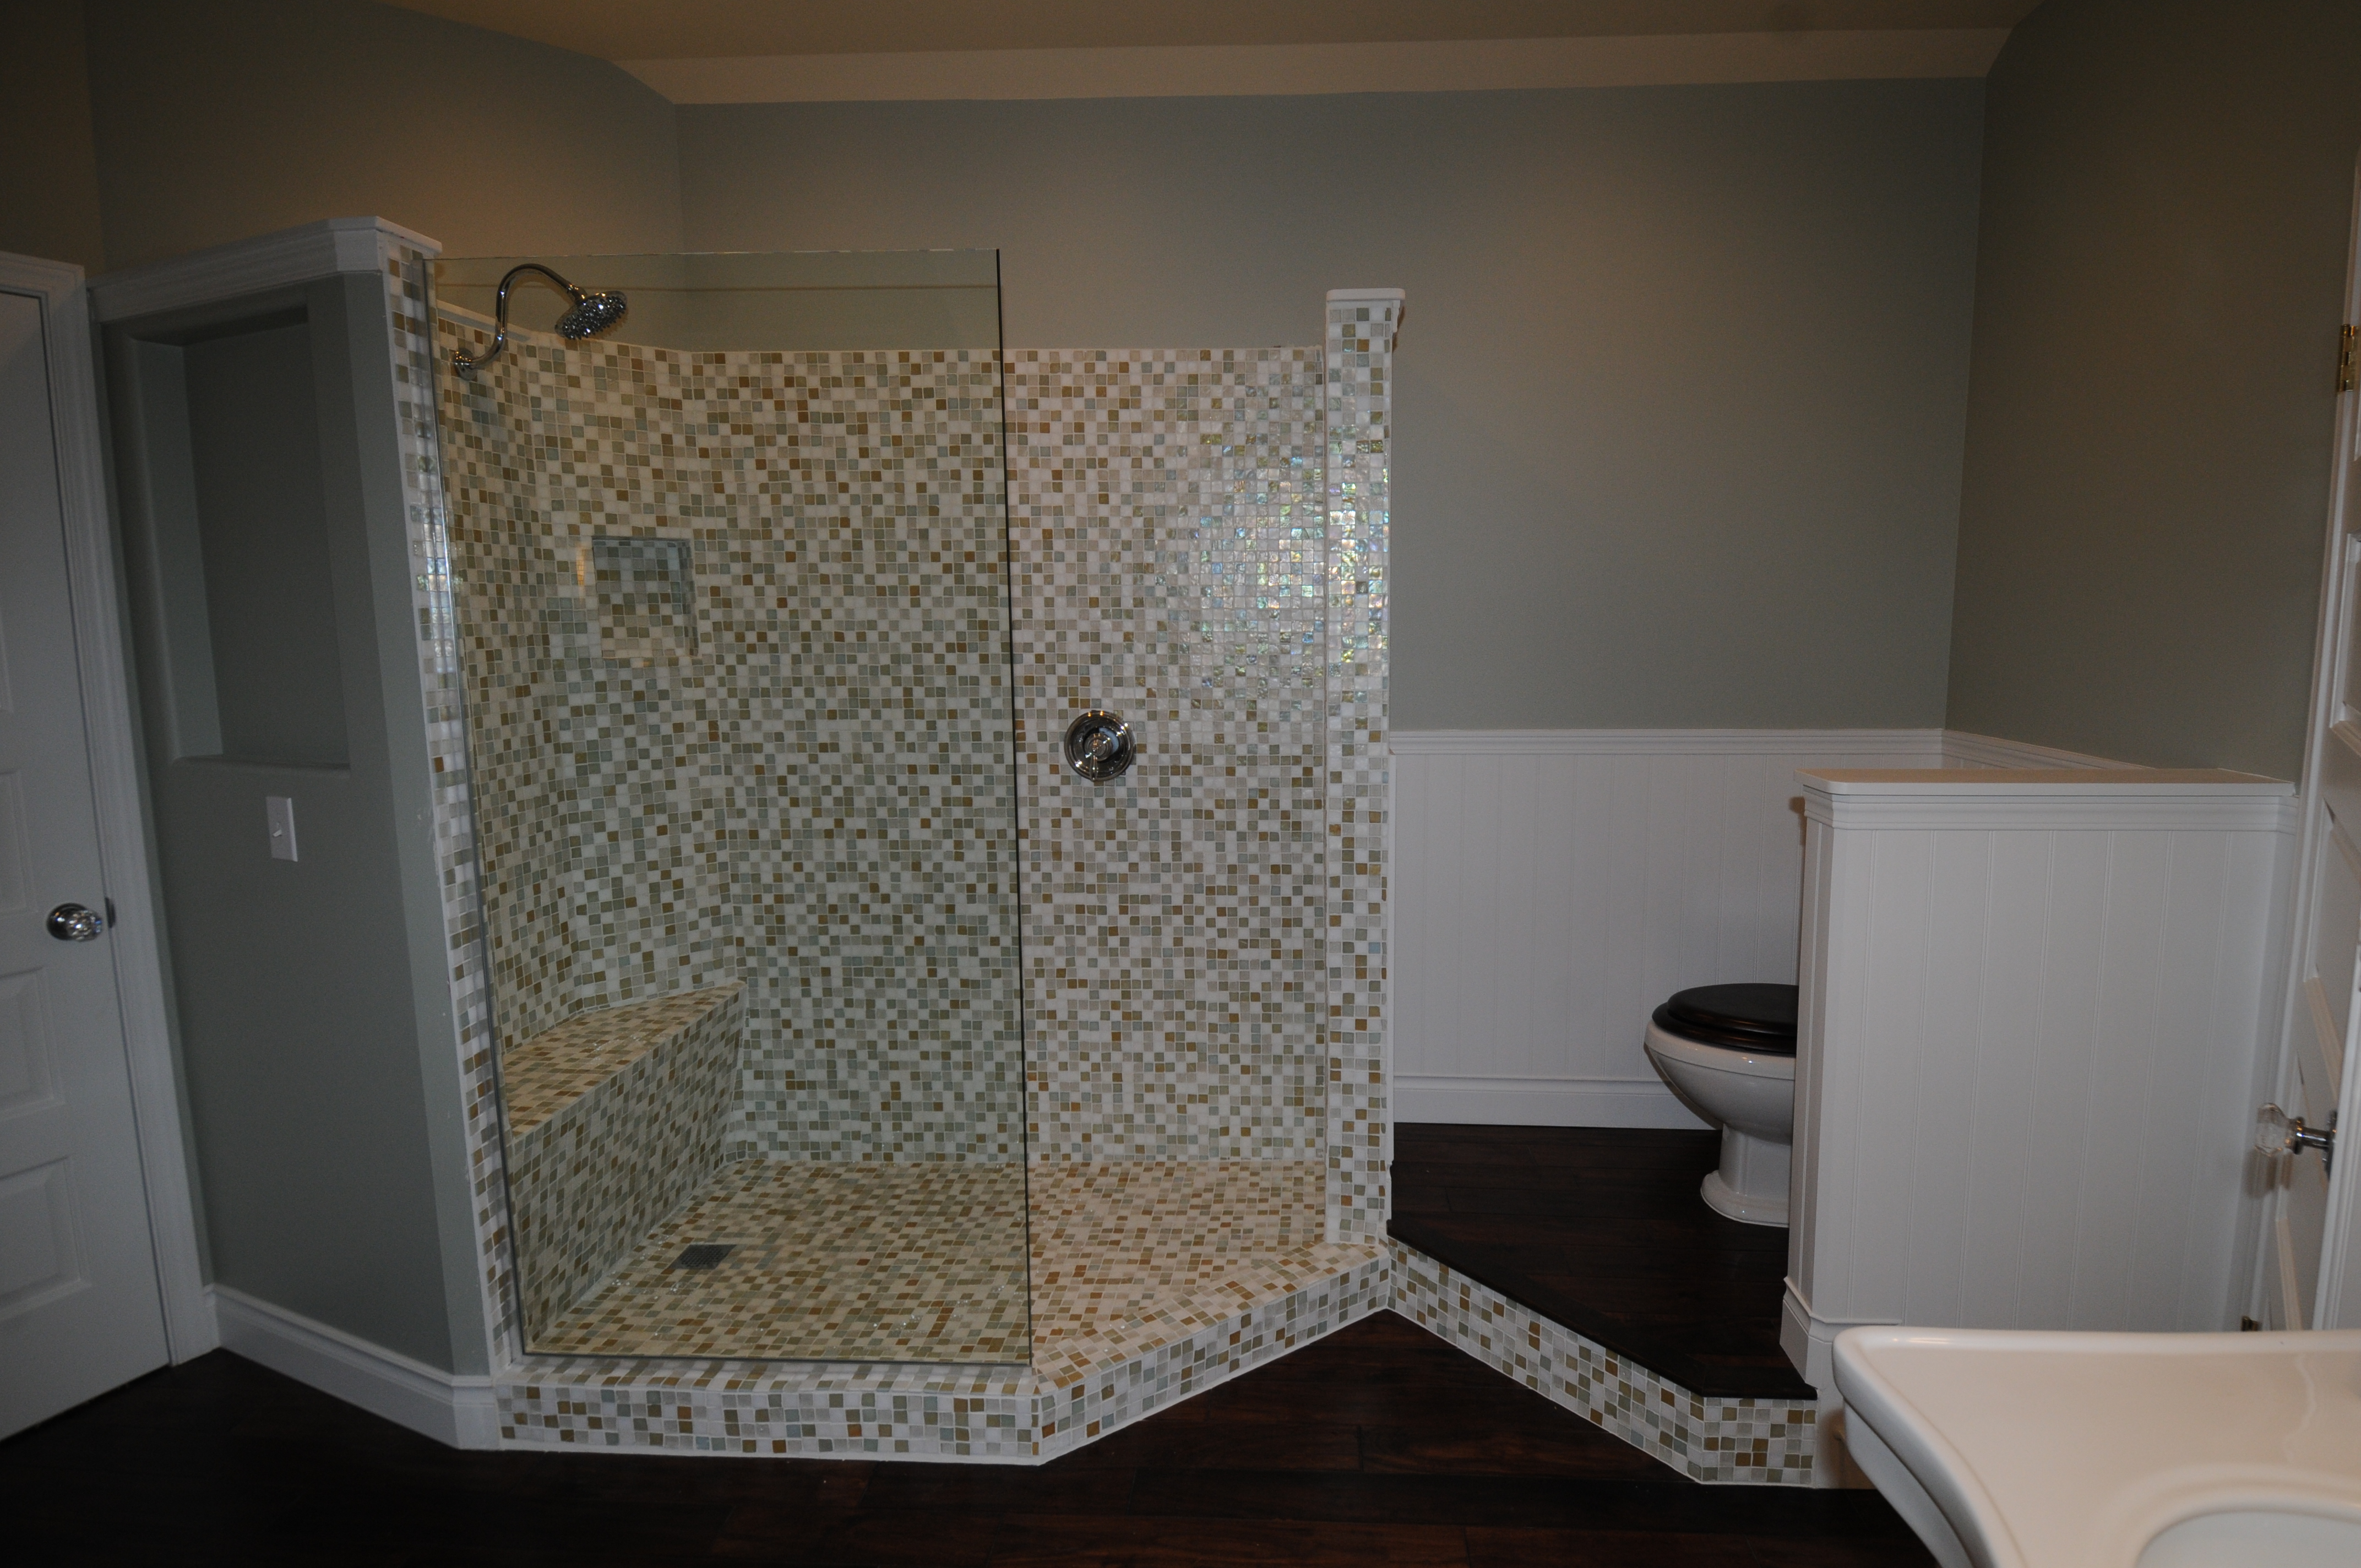 Shower Area of the Kennedy House Bath After Renovation